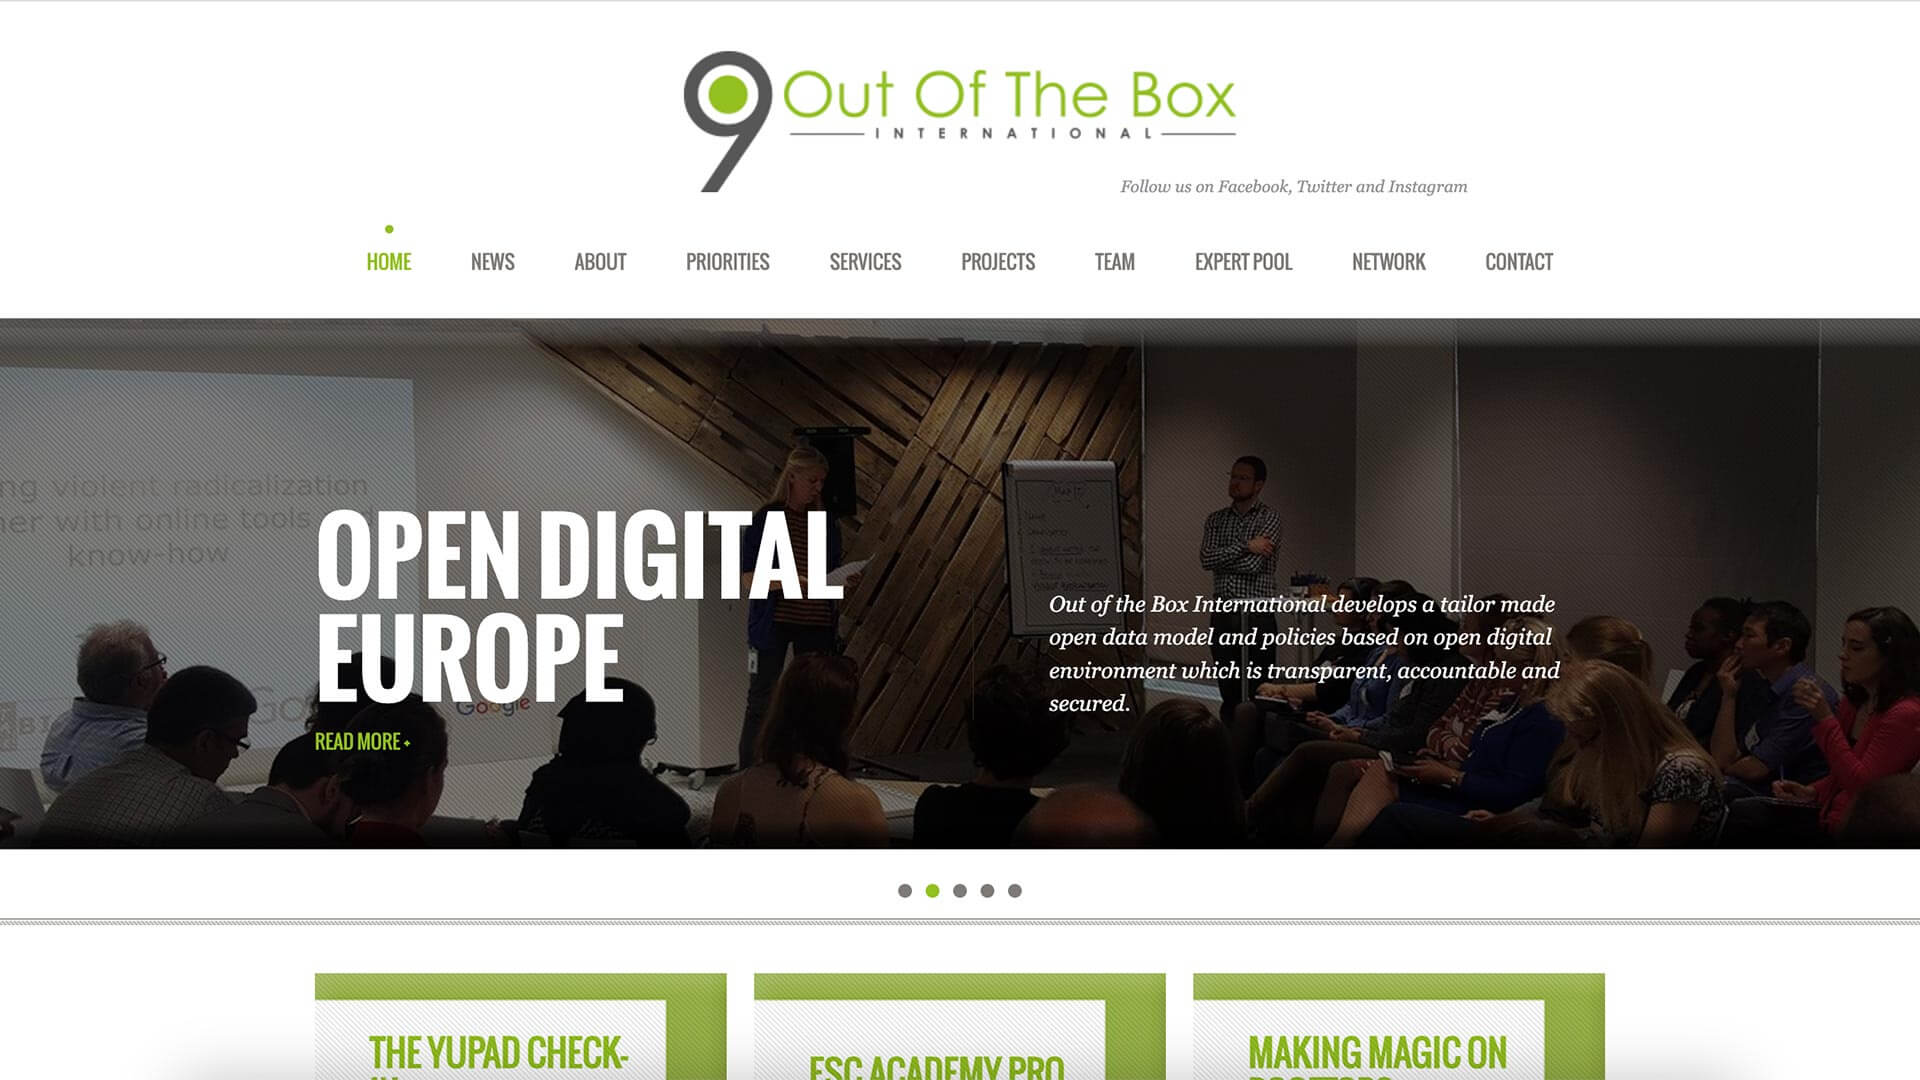 Out of the box International